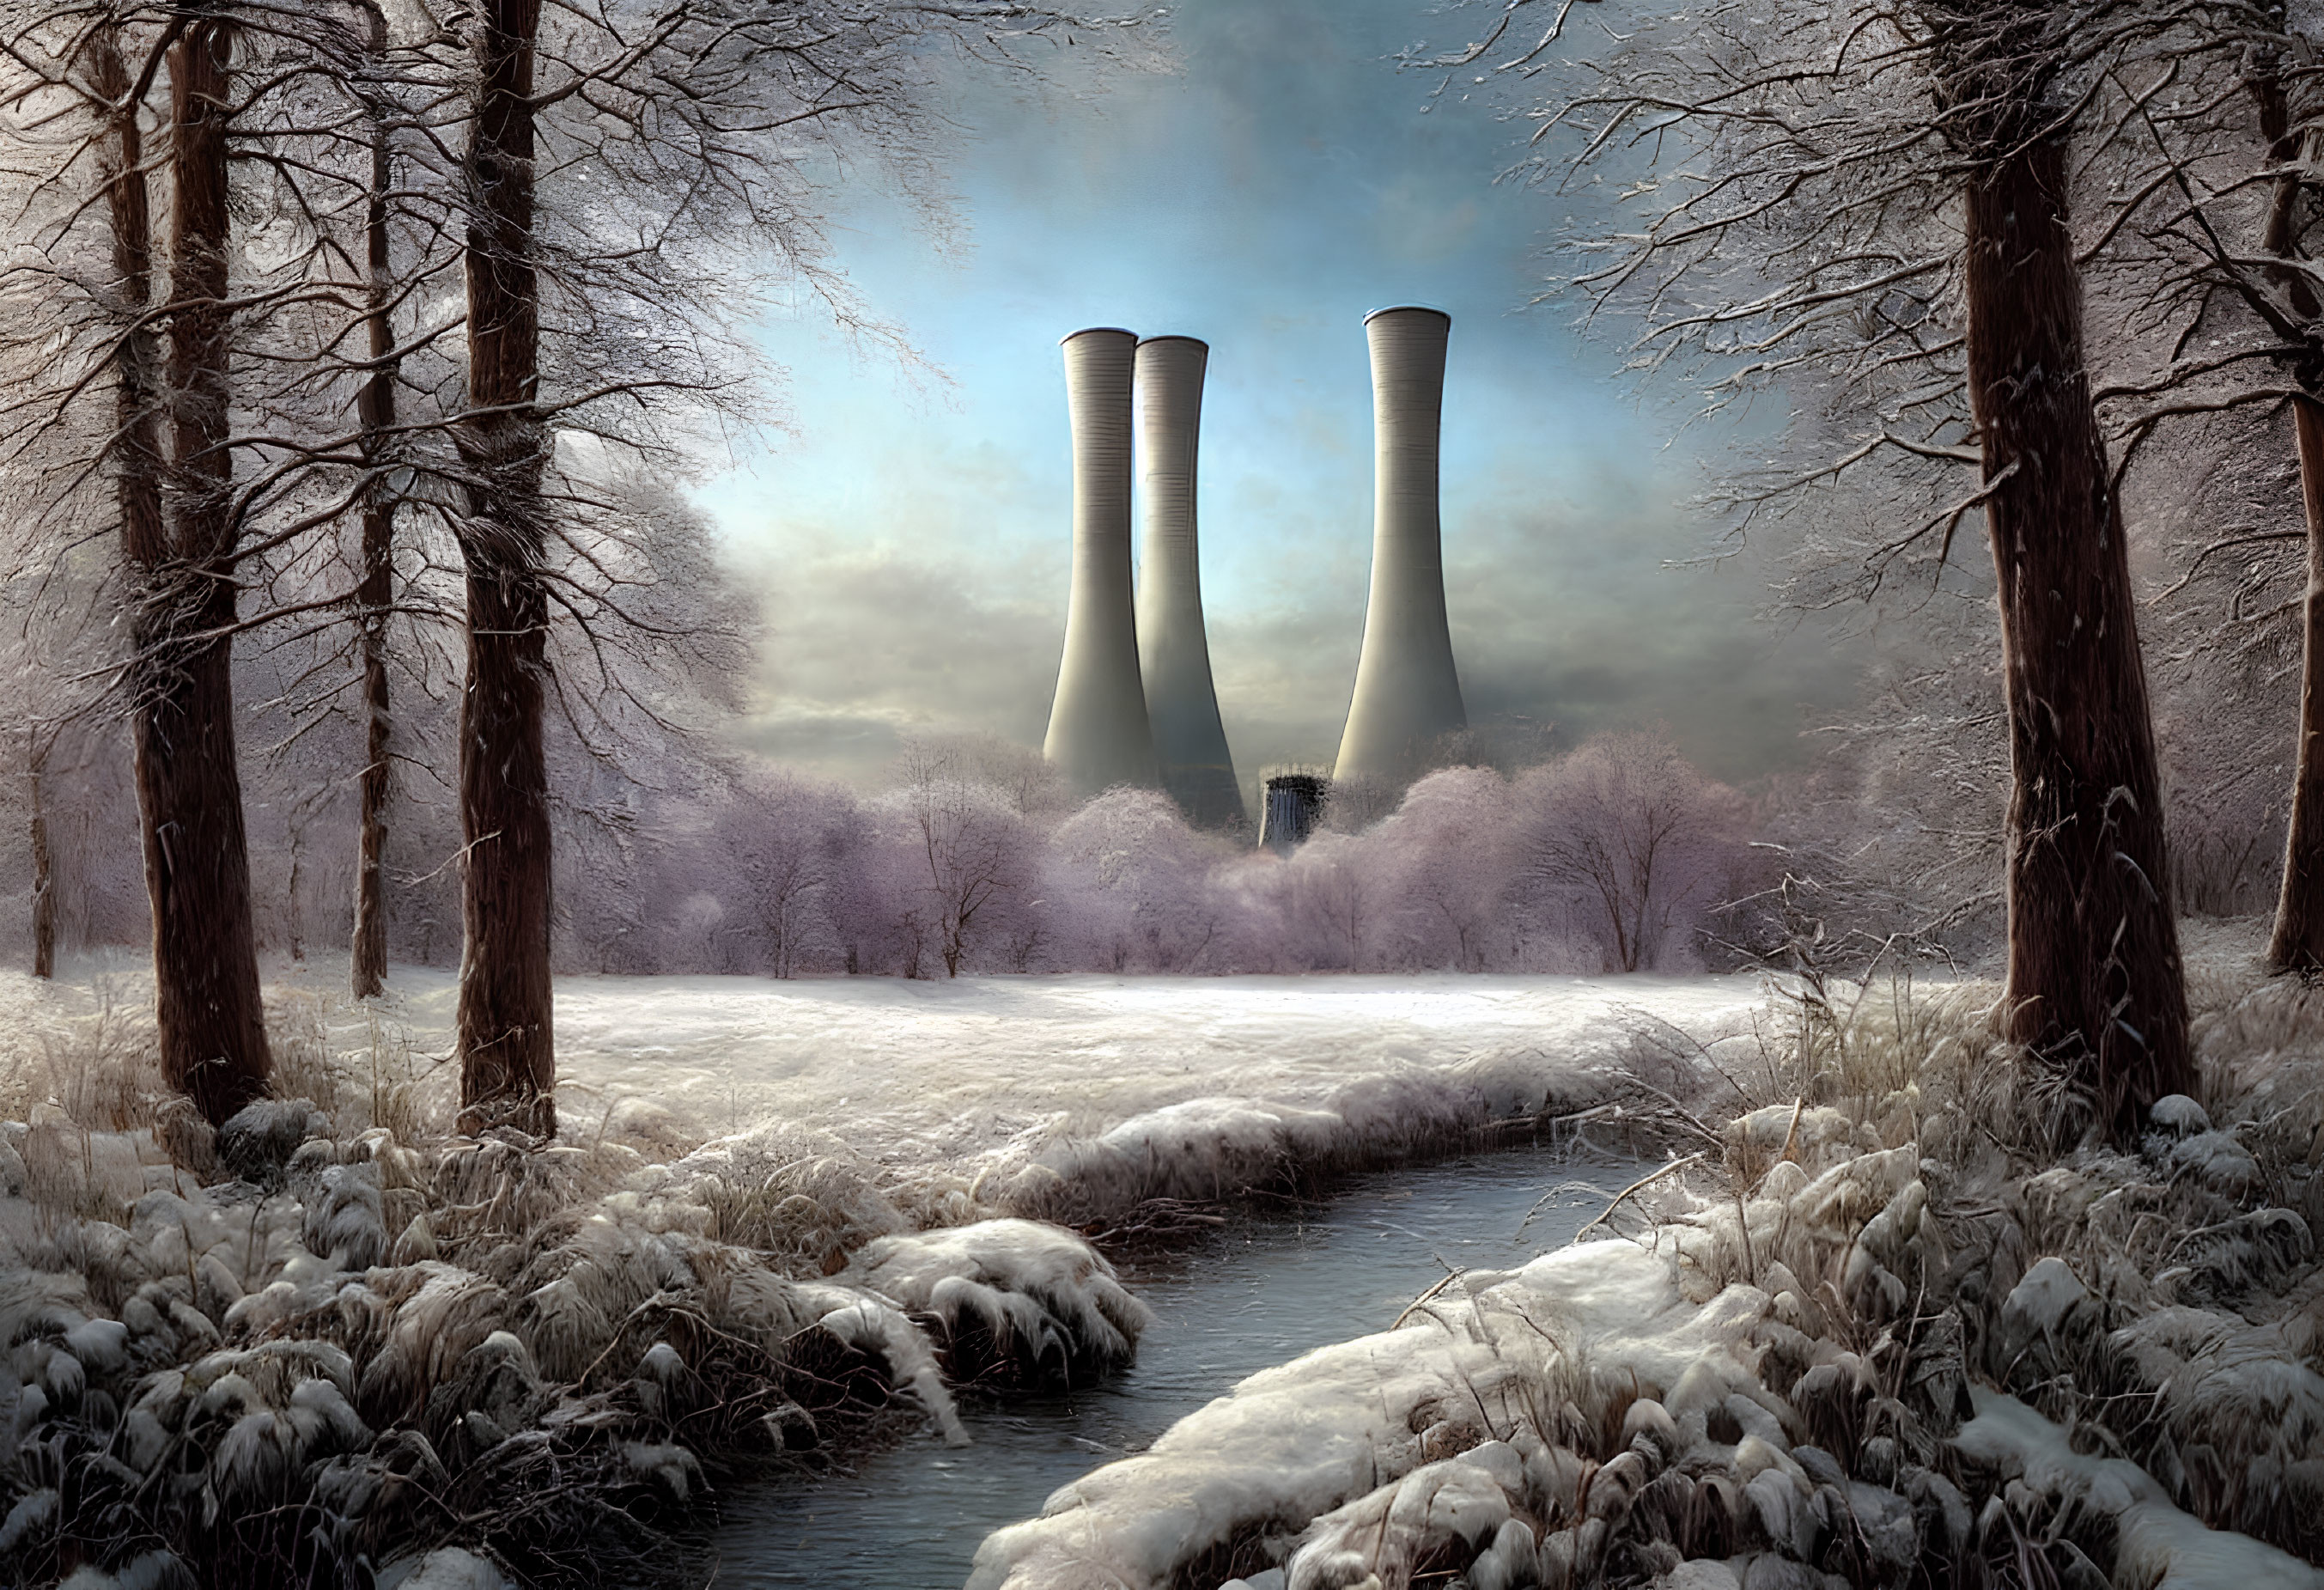 Winter scene with stream, bare trees, and cooling towers in snowy forest landscape